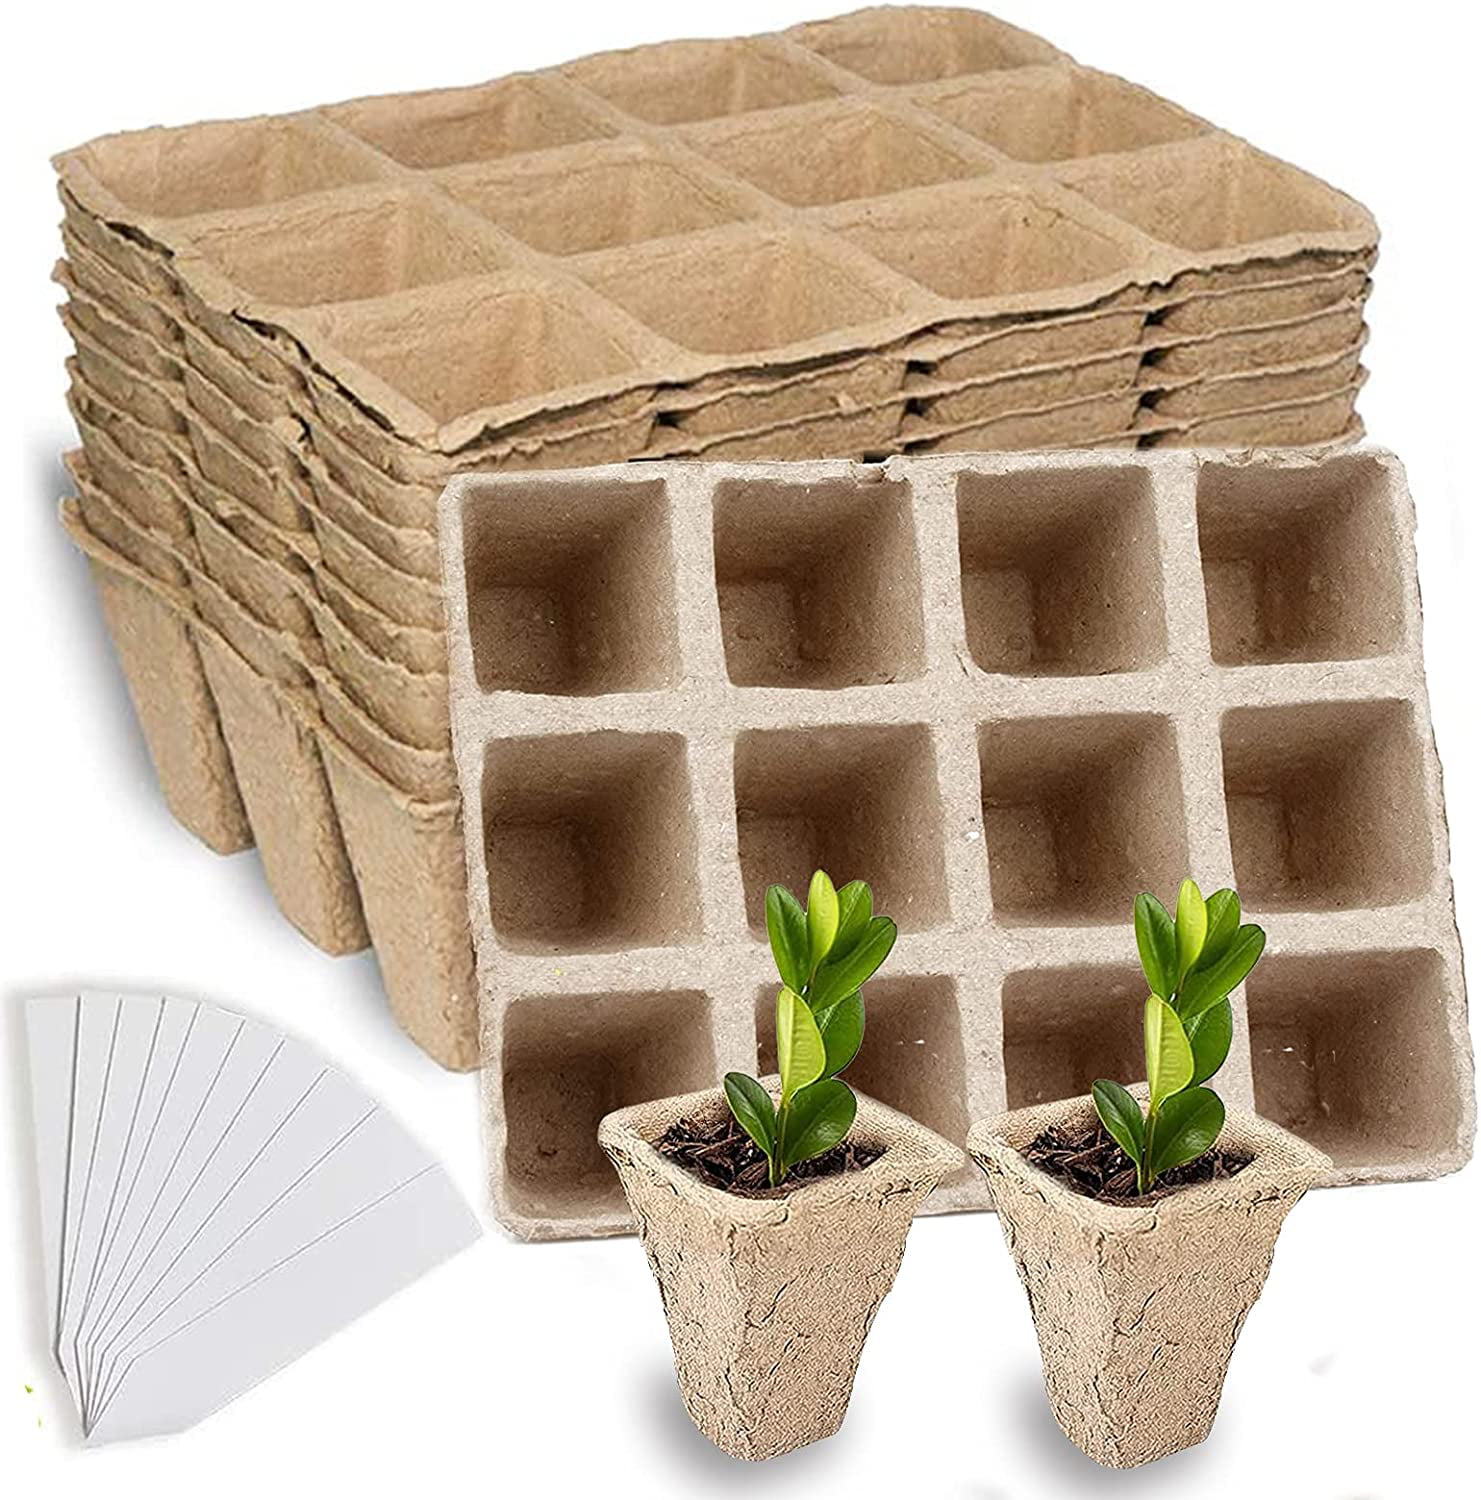 Nursery Biodegradable Germination Seedling Trays Seed Starter Peat Pots,15 PCS Premium Seed Starter Trays,Peat Pots for Garden Seeding Germination Trays 180 Cells with 15 Plastic Plant Labels.